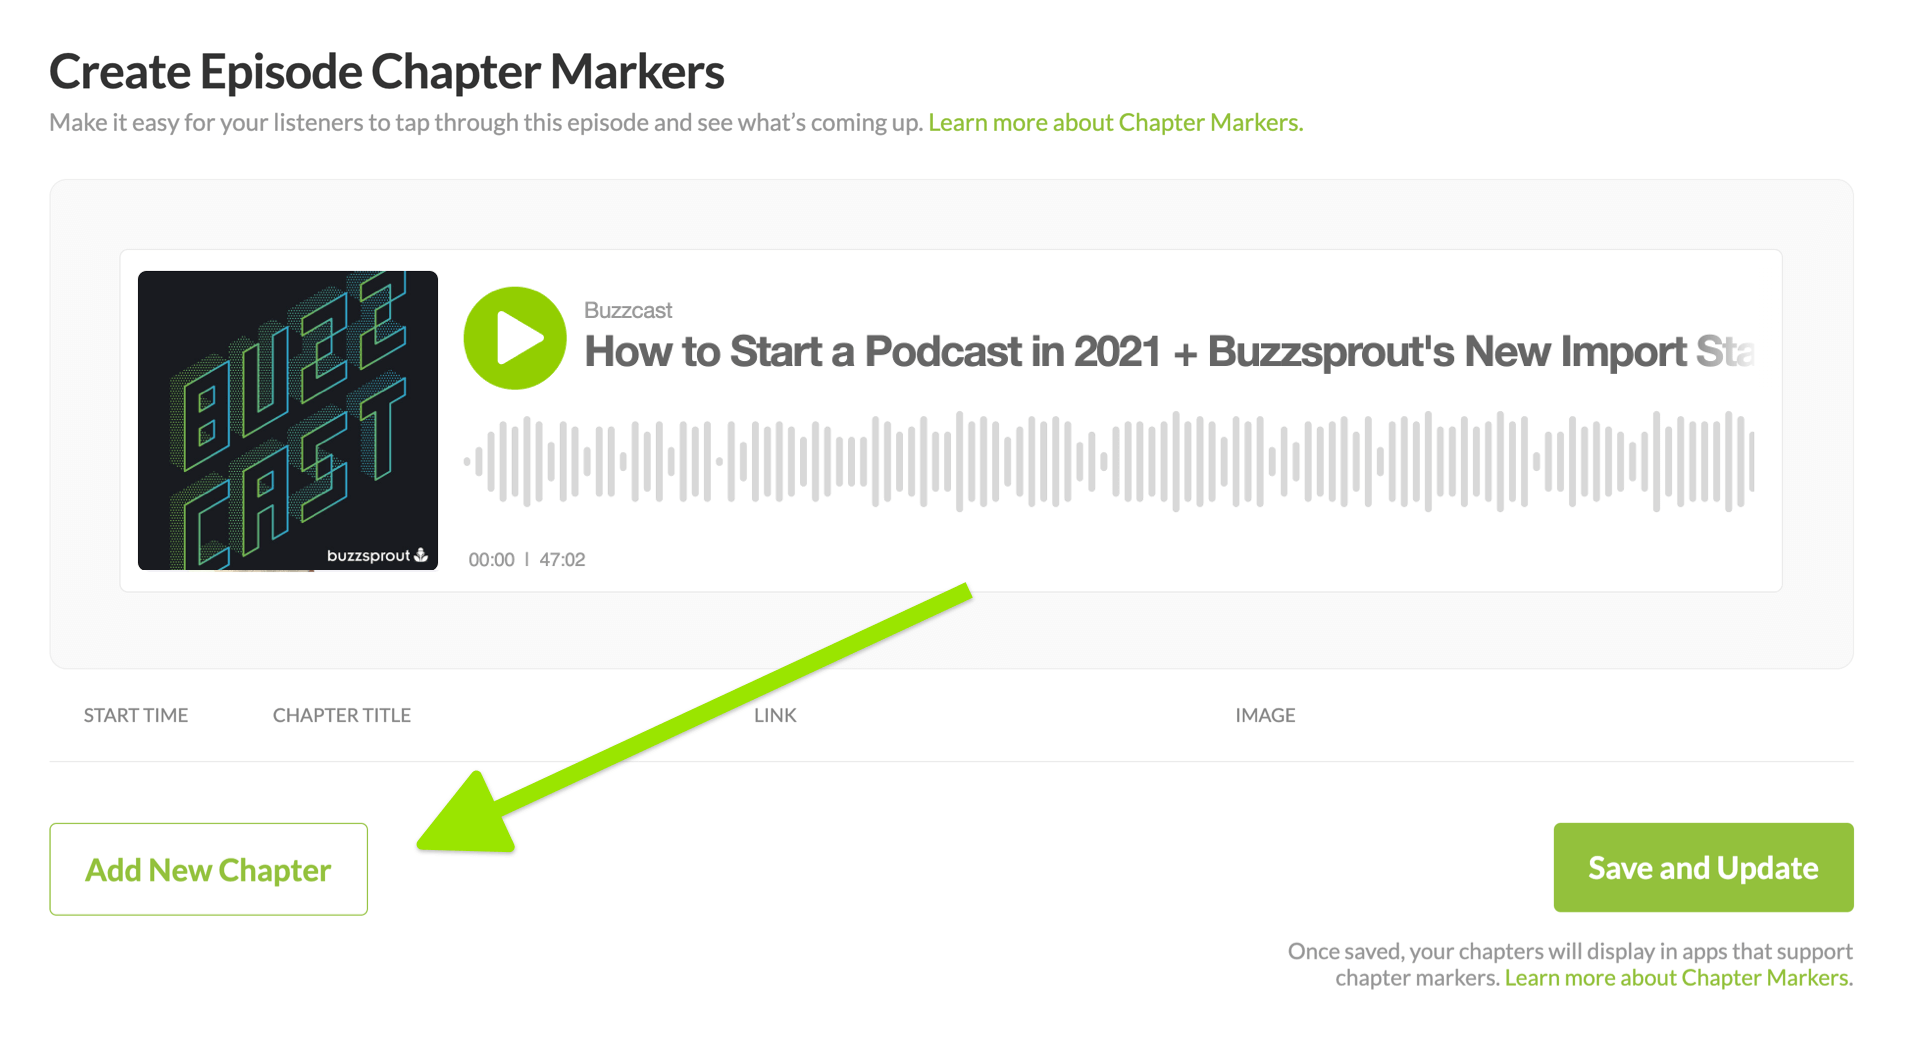 Adding Chapter Markers to Your Audio Podcast Episodes